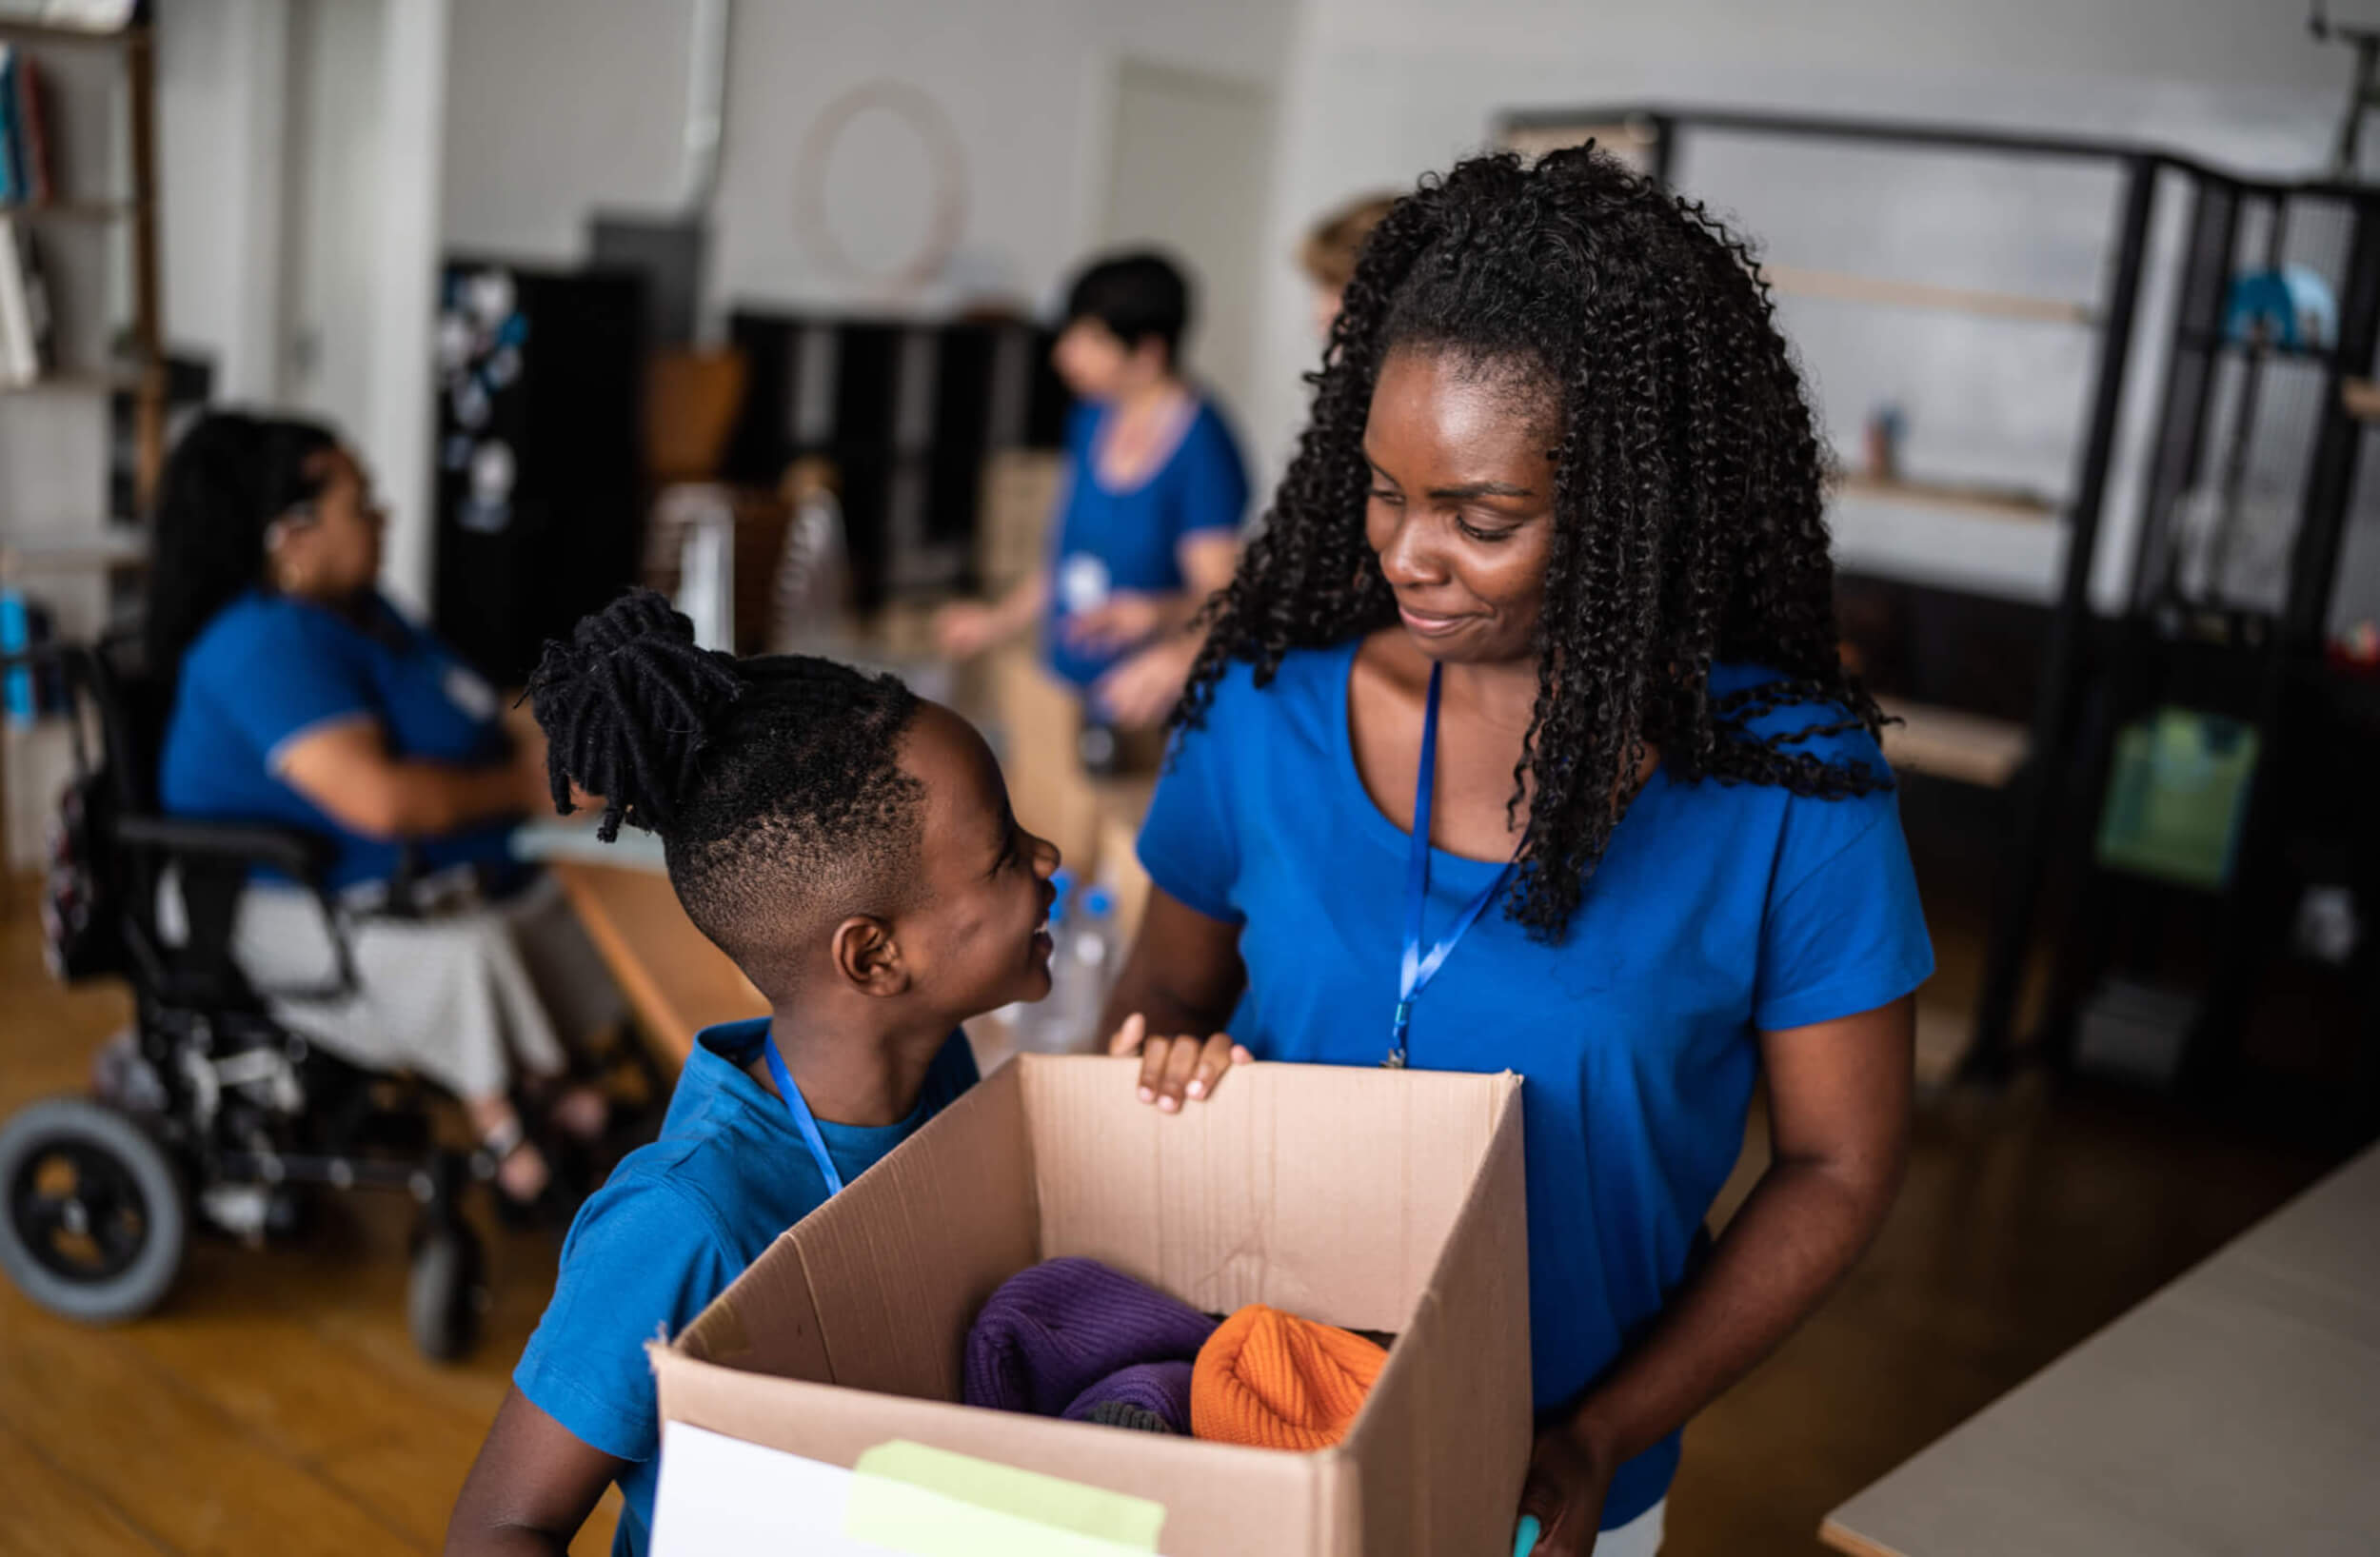 Volunteers from The Abaco Club participating in a philanthropic event, a woman and young boy in matching blue shirts share a moment while organizing donated items, demonstrating the club's commitment to supporting communities in the Bahamas